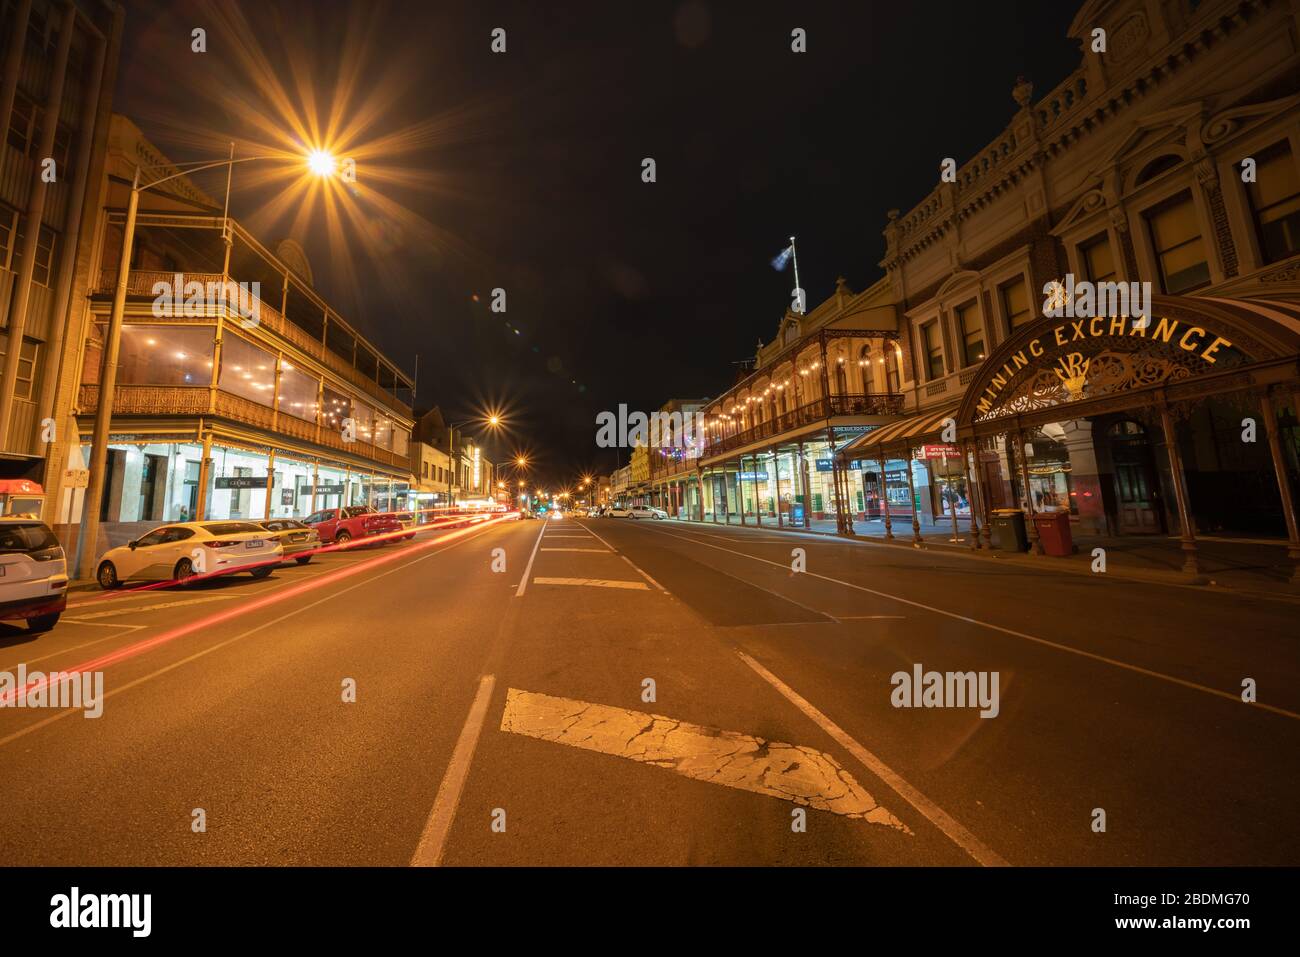 Ballarat Australia - March 15 2020; Wide angle stree view of Mair Street at night  with Mining Exchange building among other Victorian buildings under Stock Photo